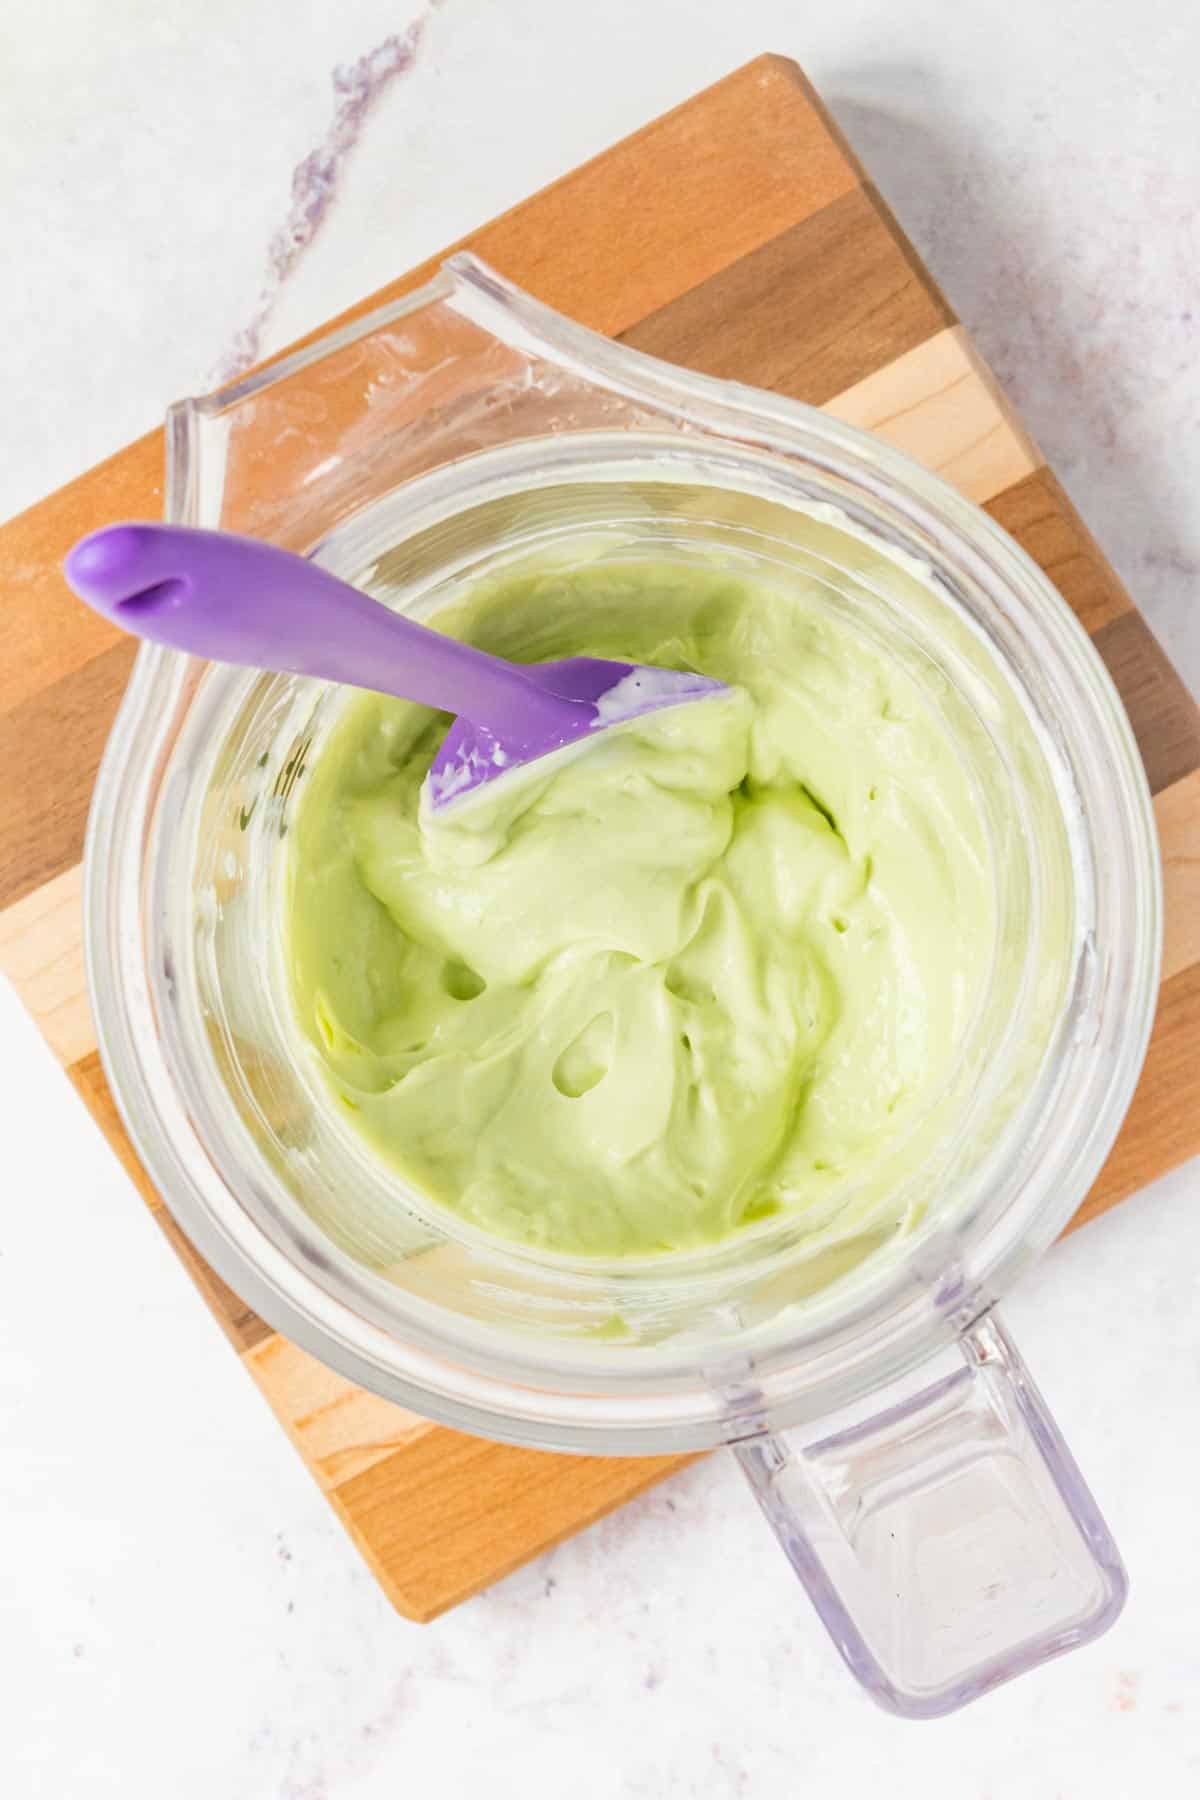 A spatula in the finished avocado crema in the blender jar.